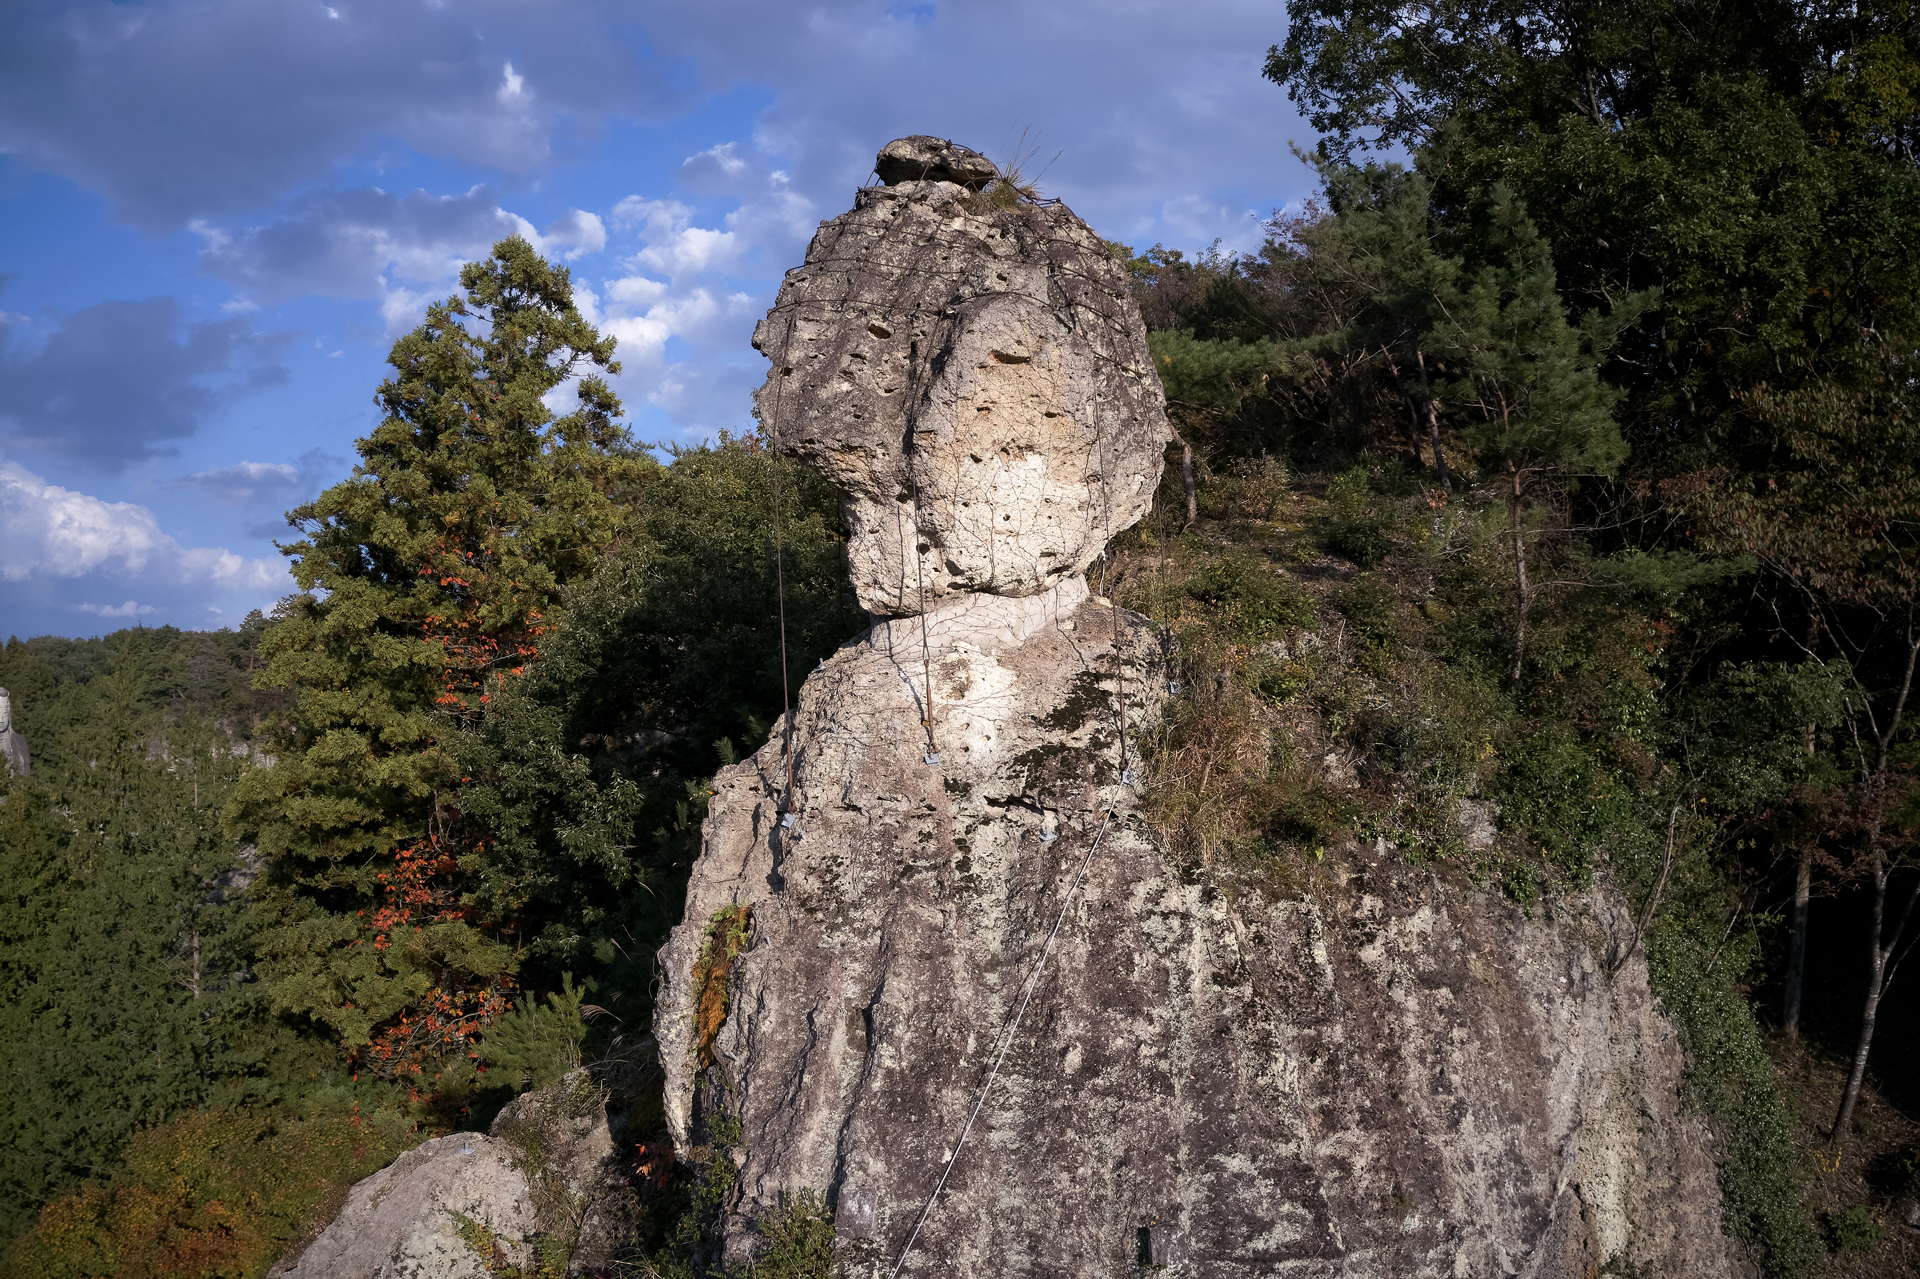 Oddly-shaped Rock “Stone thrown by Tengu, a legendary creature in ancient Japanese folklore”